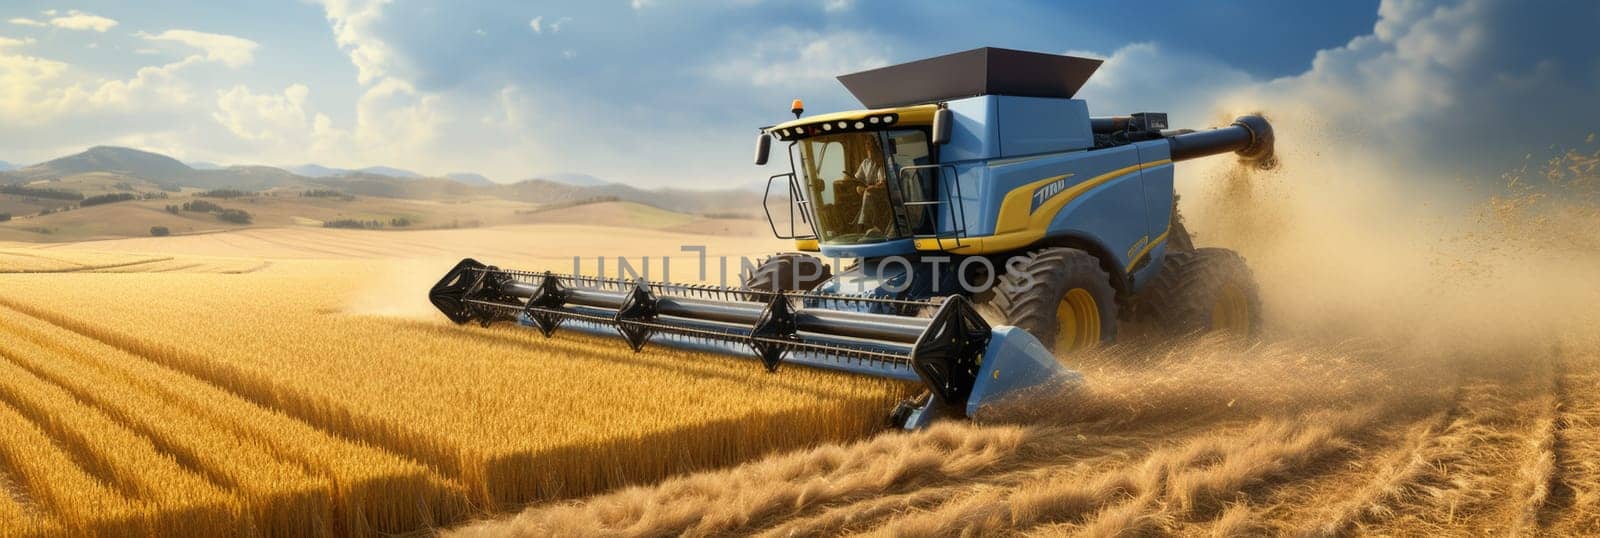 A combine in blue and yellow colors is seen harvesting wheat in a vast field.